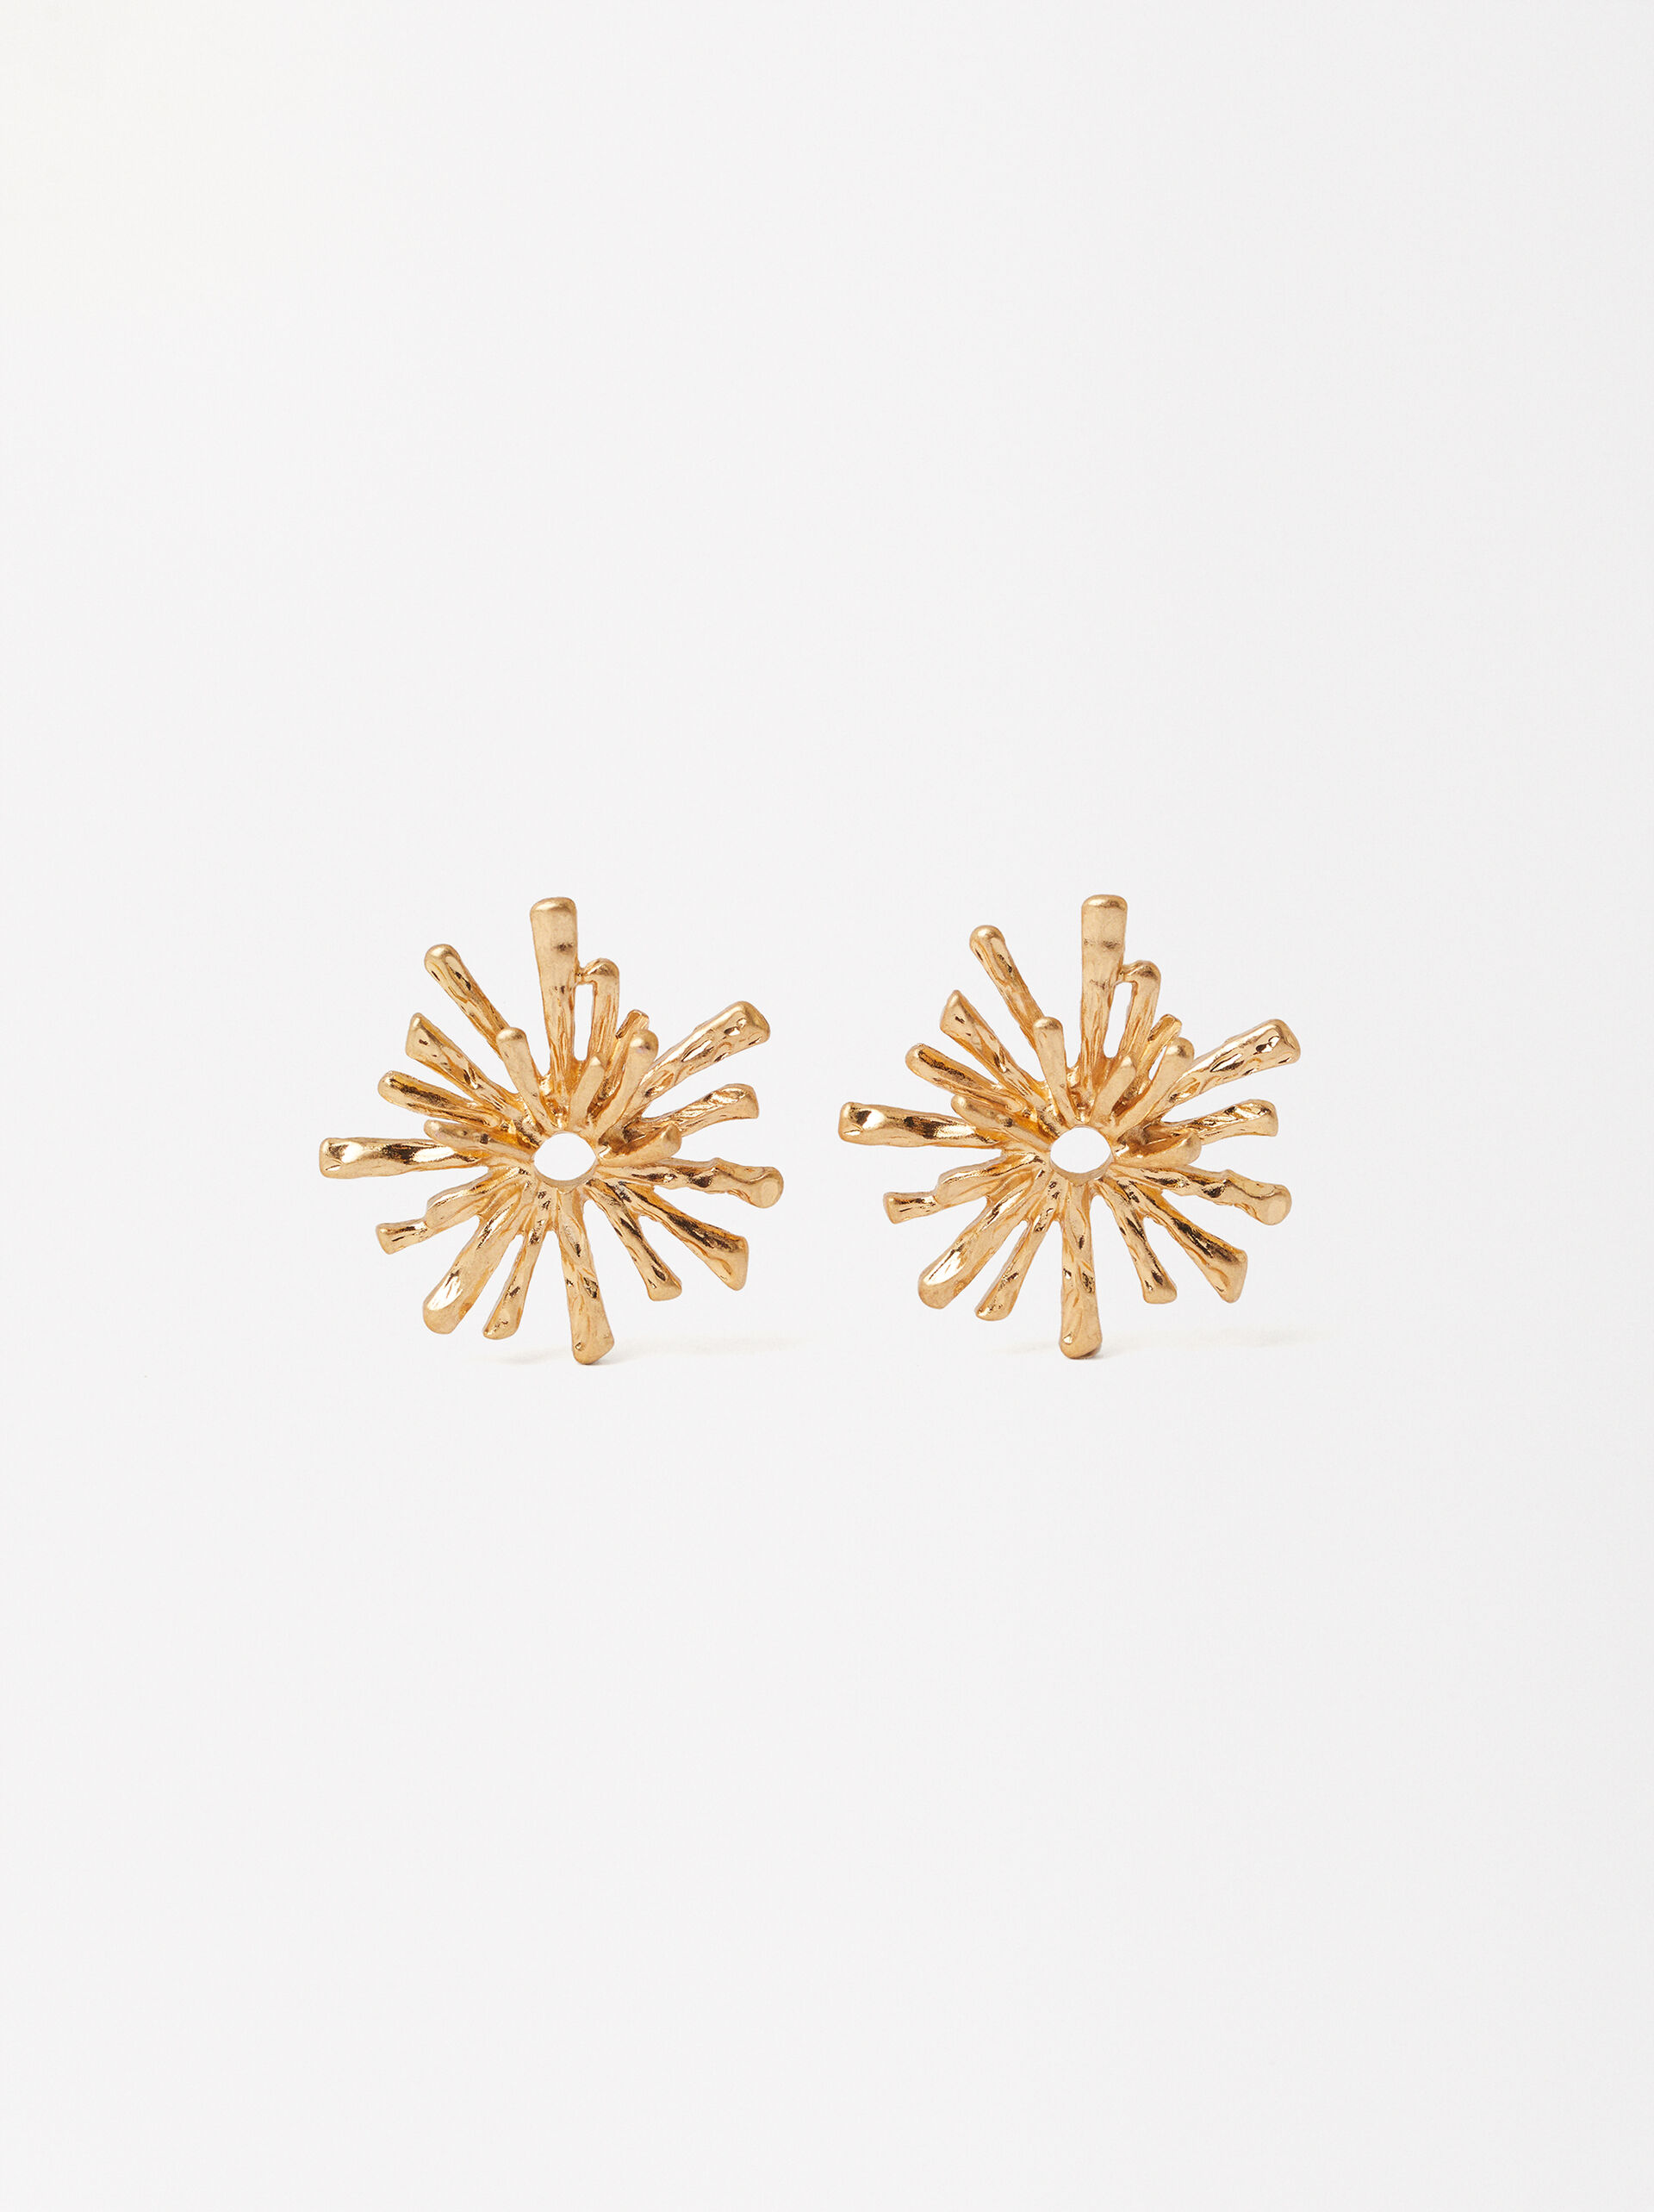 Sea Urchin Gold Earrings image number 0.0